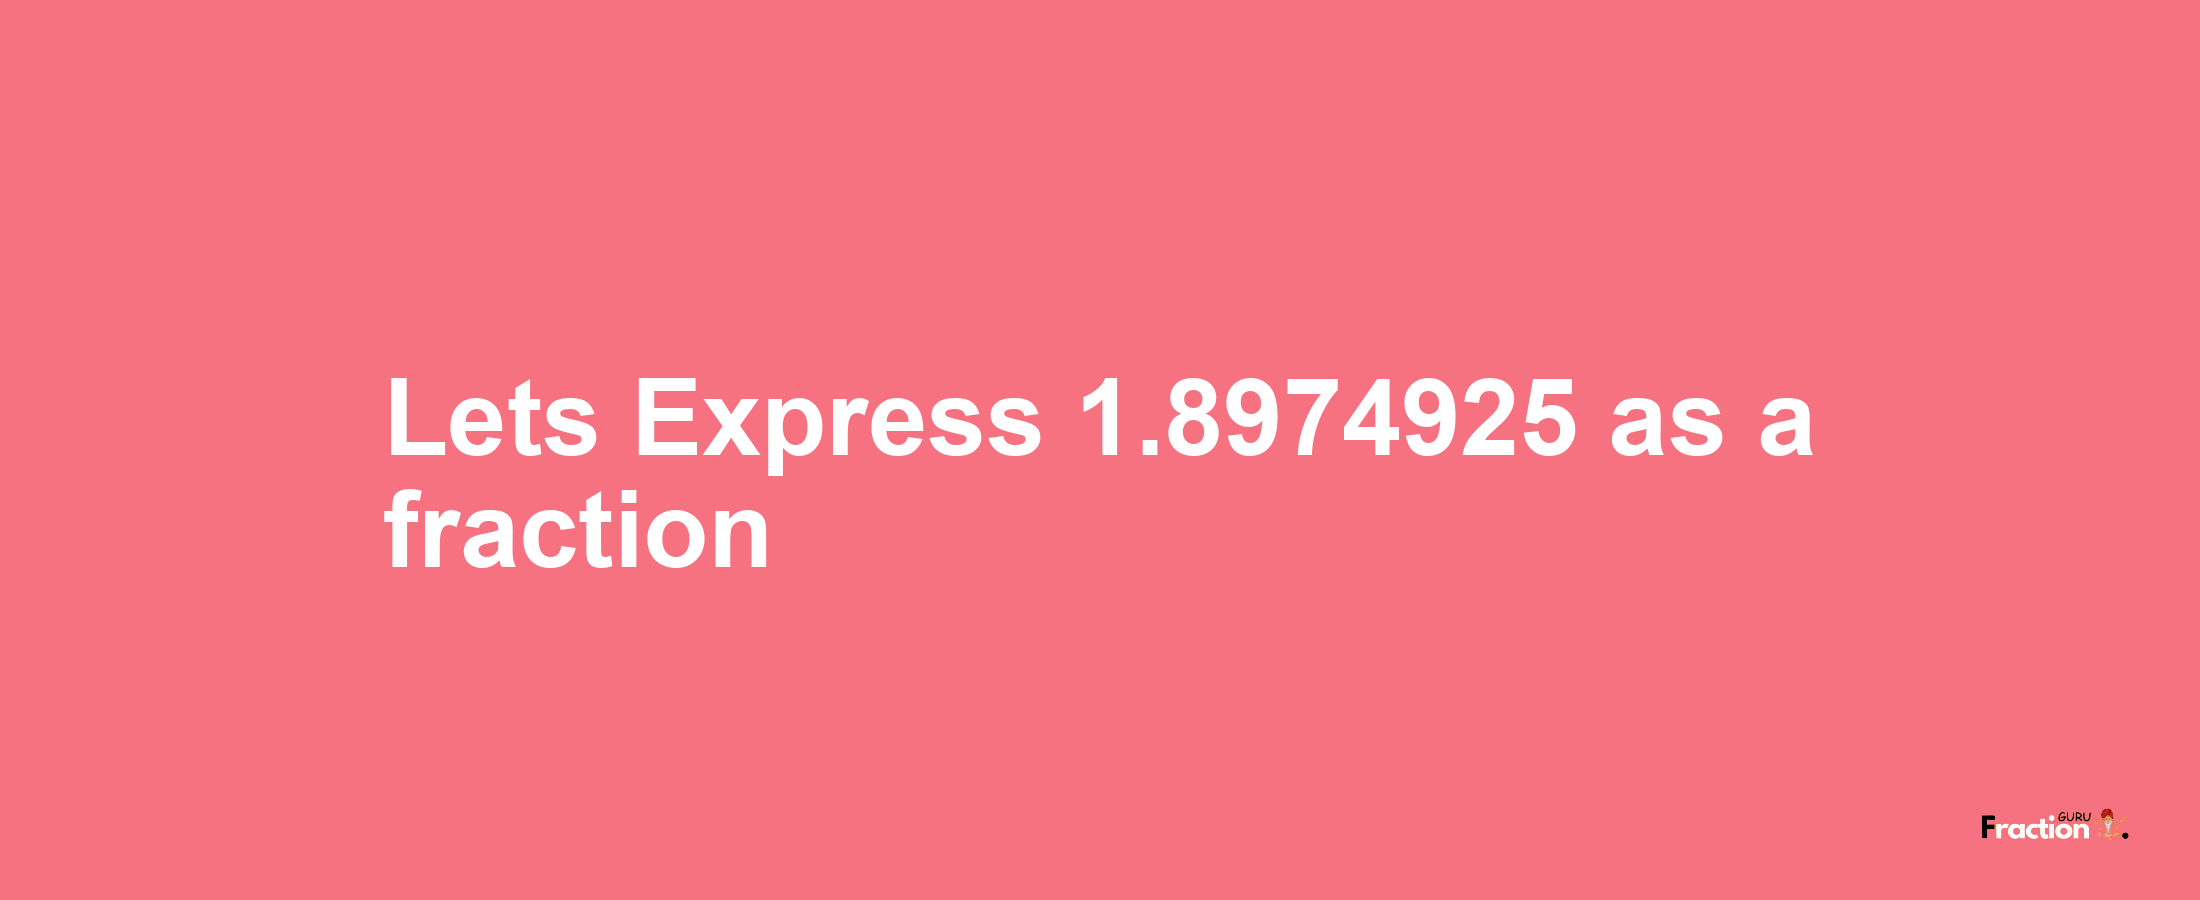 Lets Express 1.8974925 as afraction